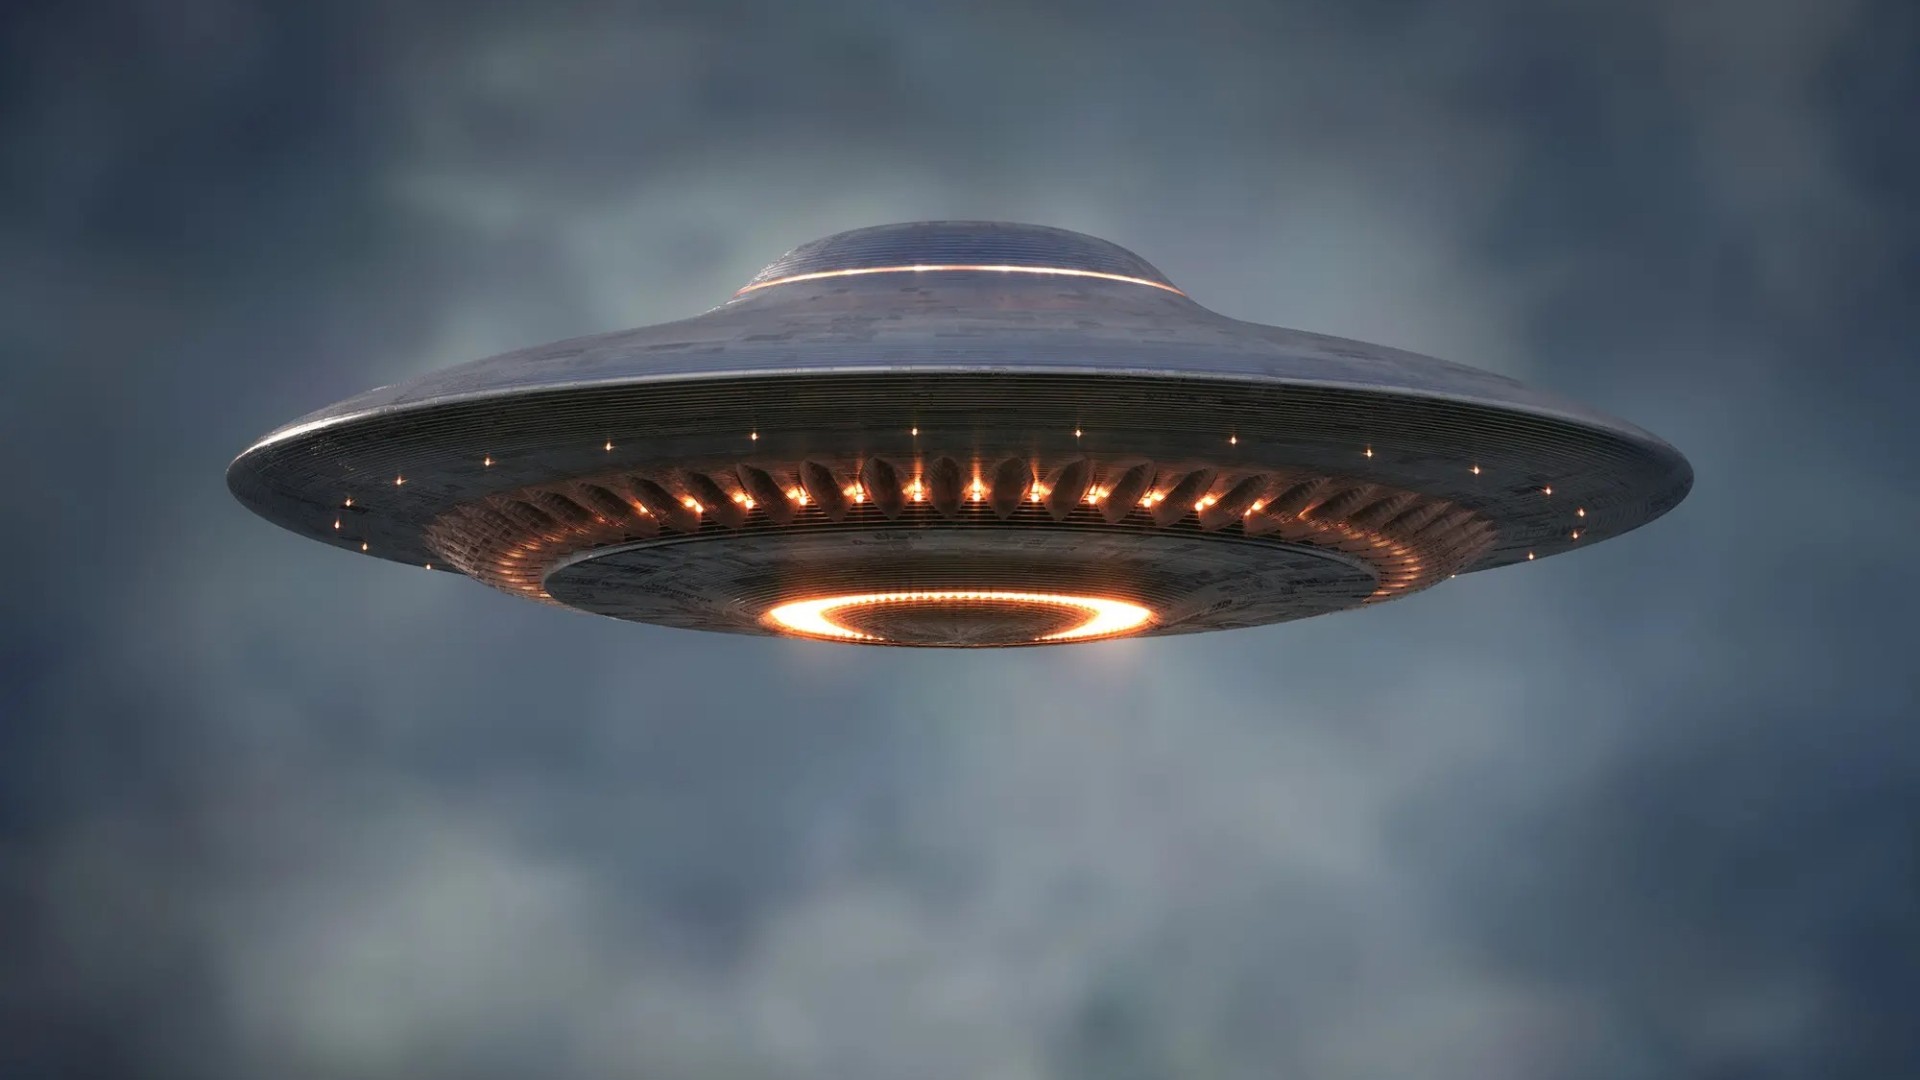 UFO Wallpapers